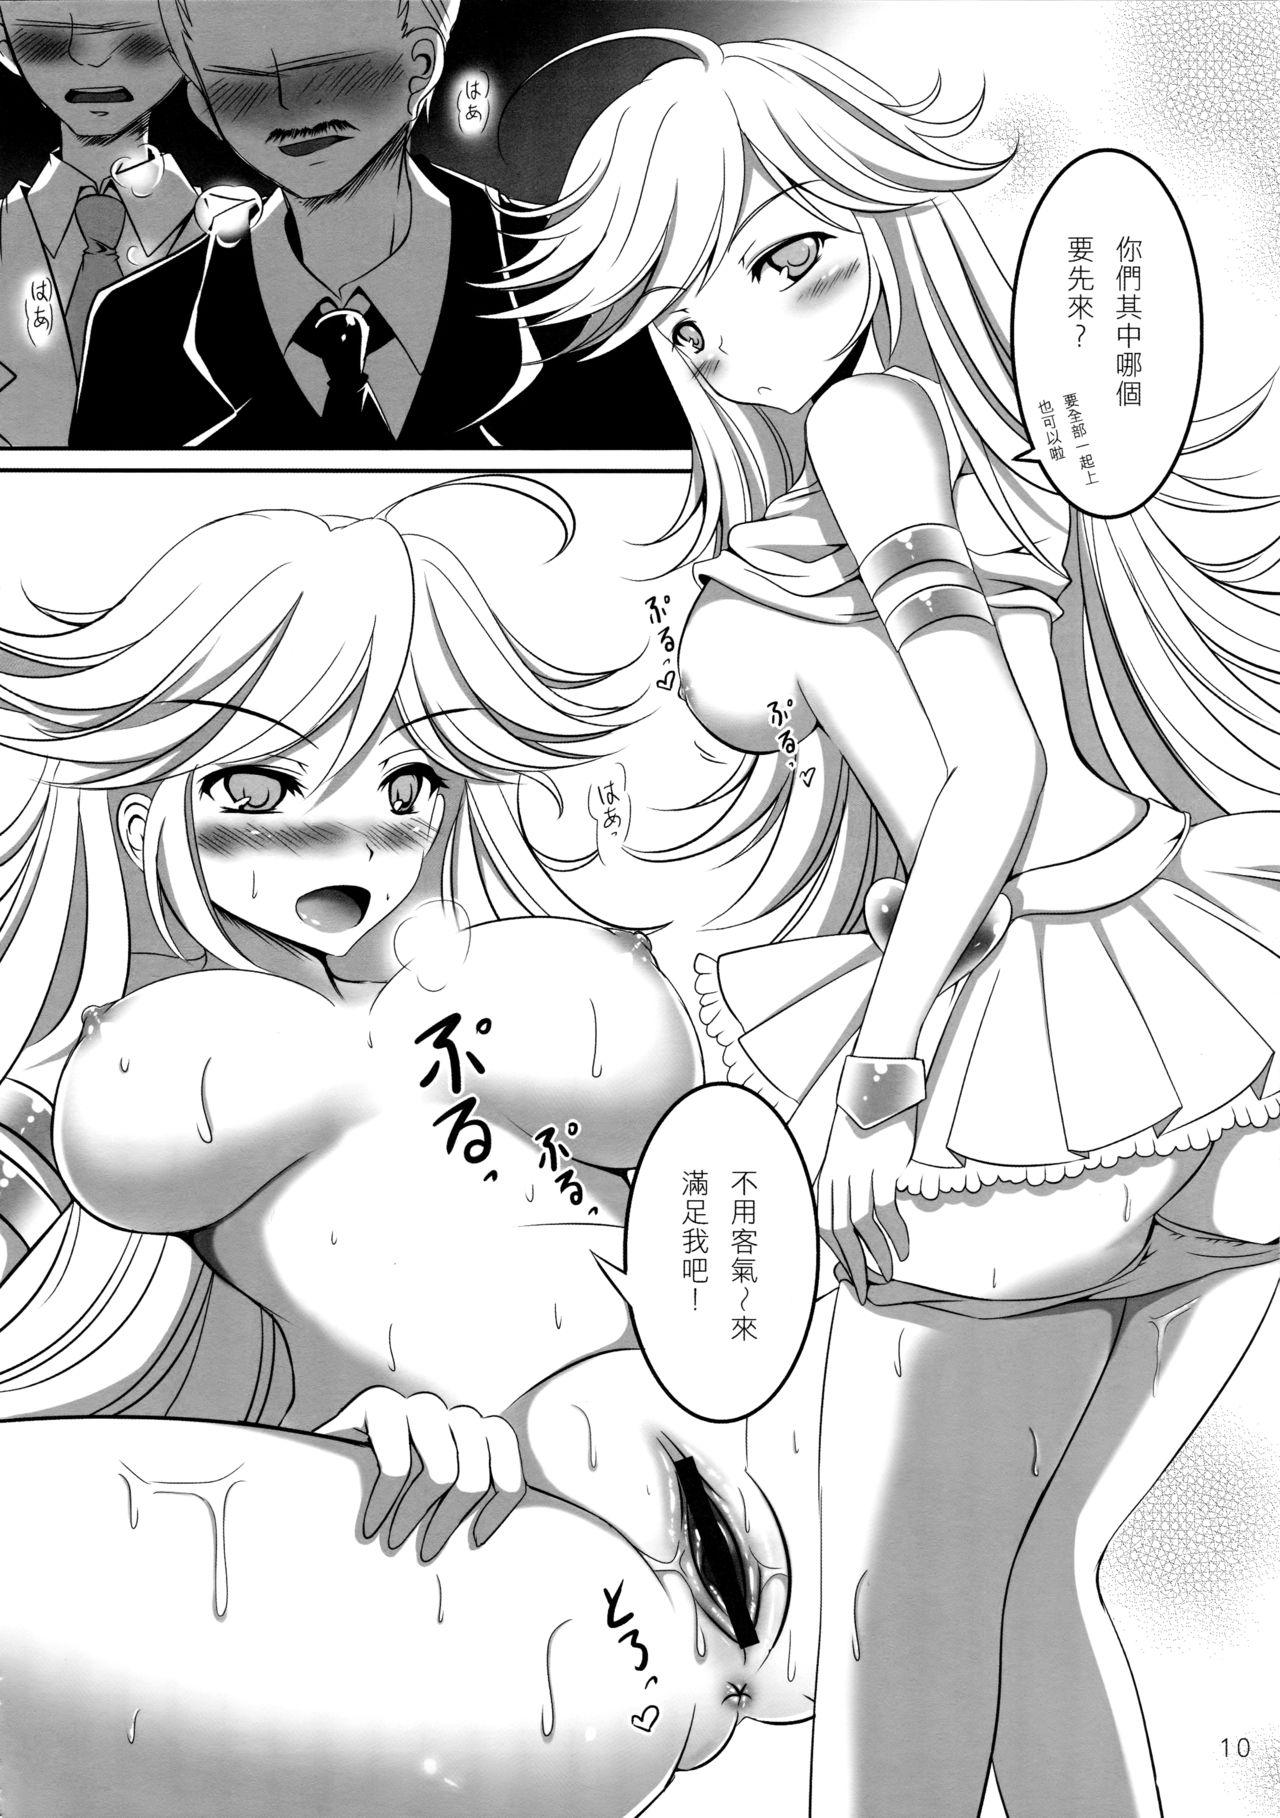 Female Angel Bitches! - Panty and stocking with garterbelt Voyeursex - Page 10